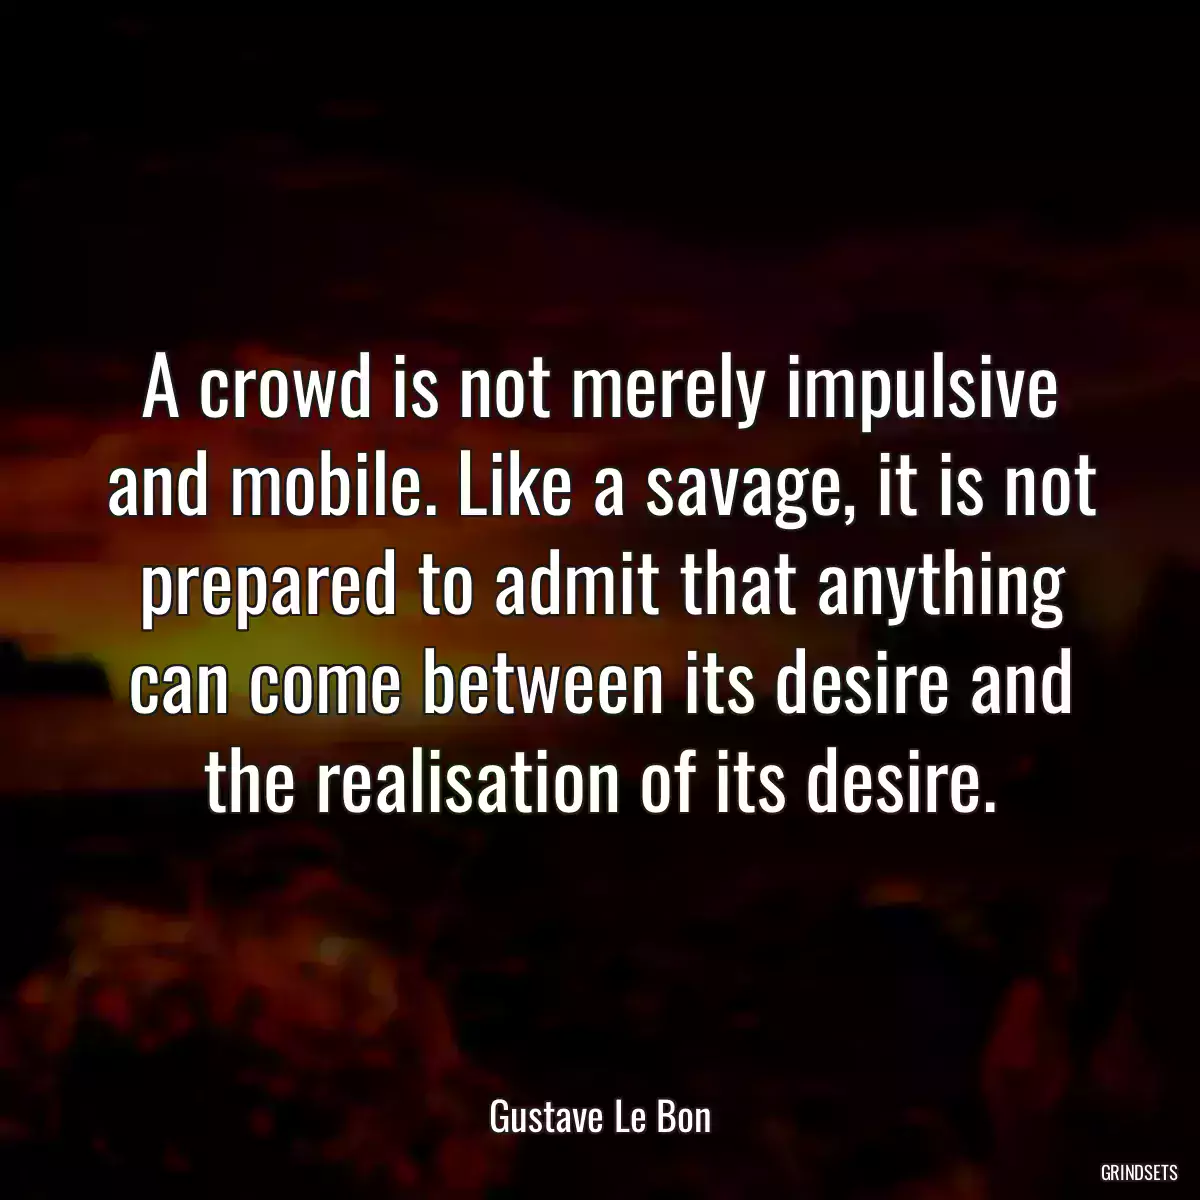 A crowd is not merely impulsive and mobile. Like a savage, it is not prepared to admit that anything can come between its desire and the realisation of its desire.